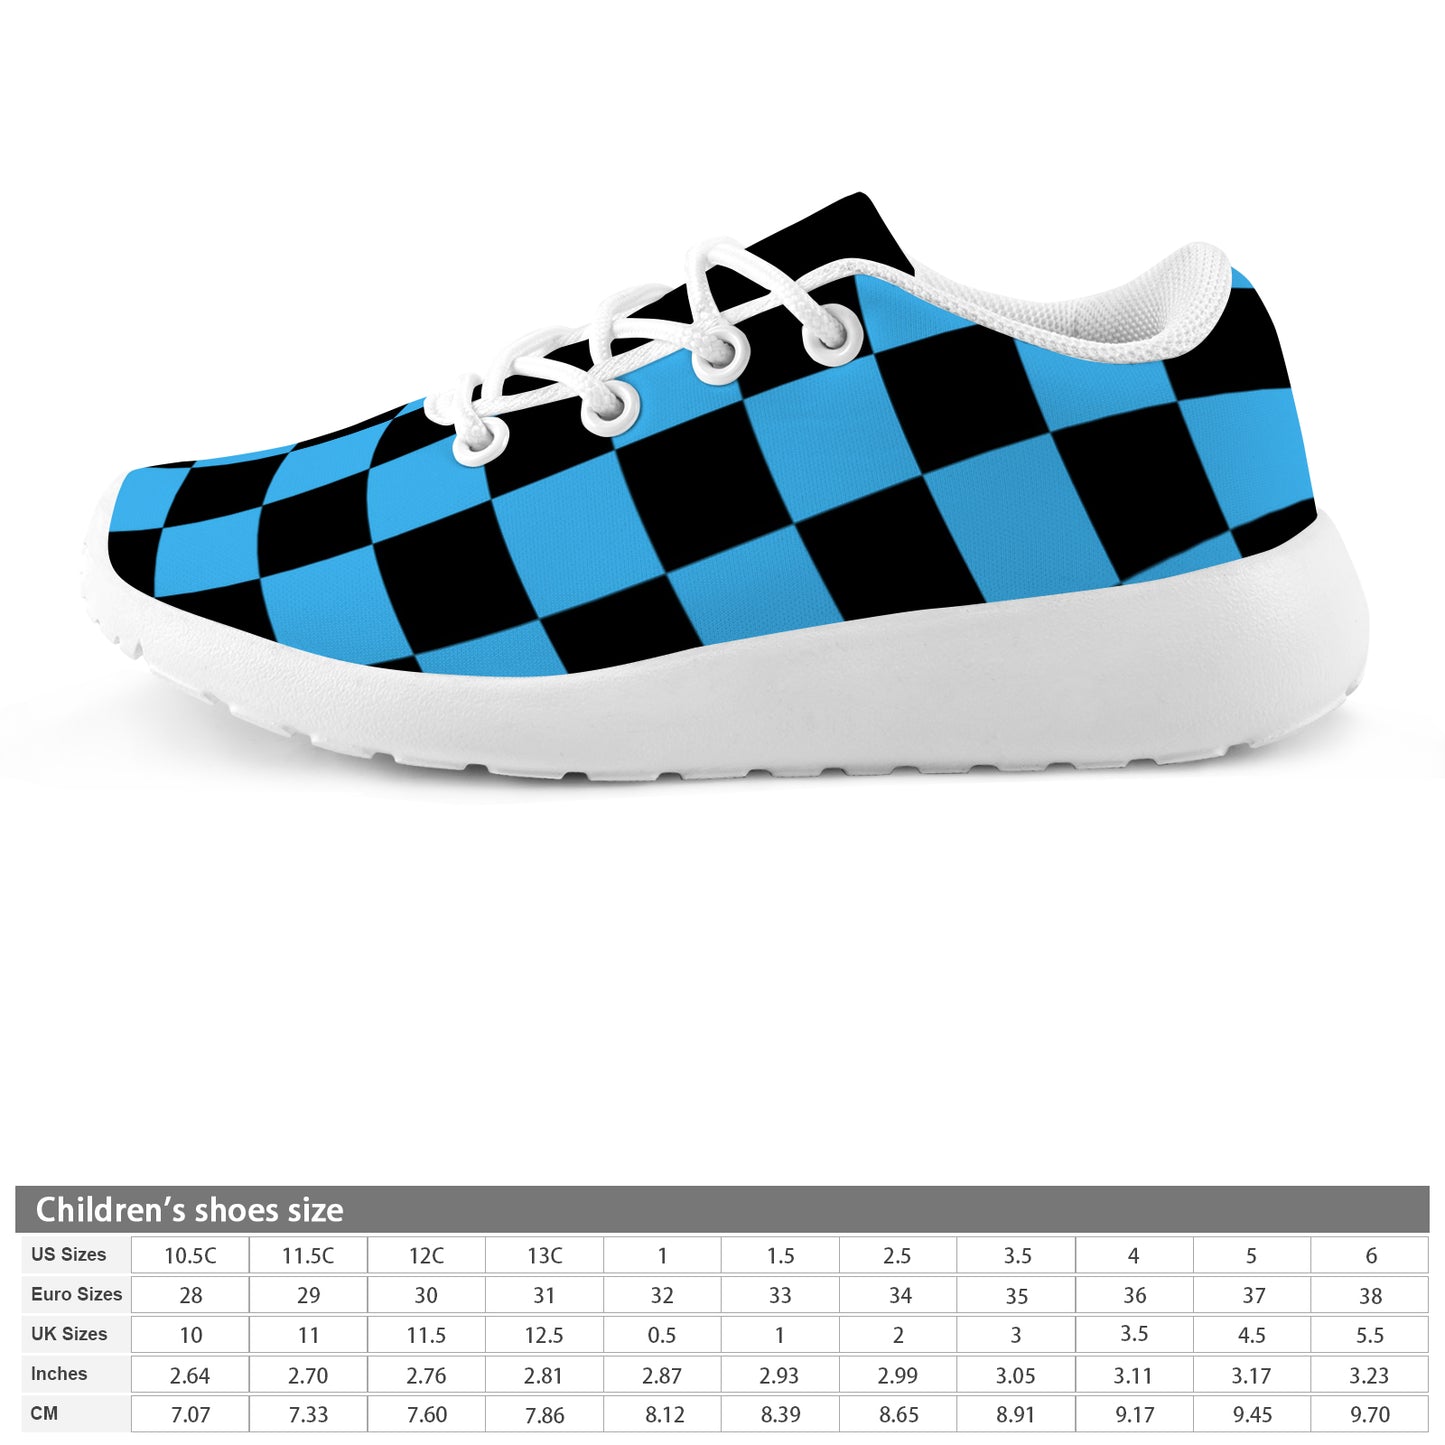 Kid's Sneakers - Blue Checkers